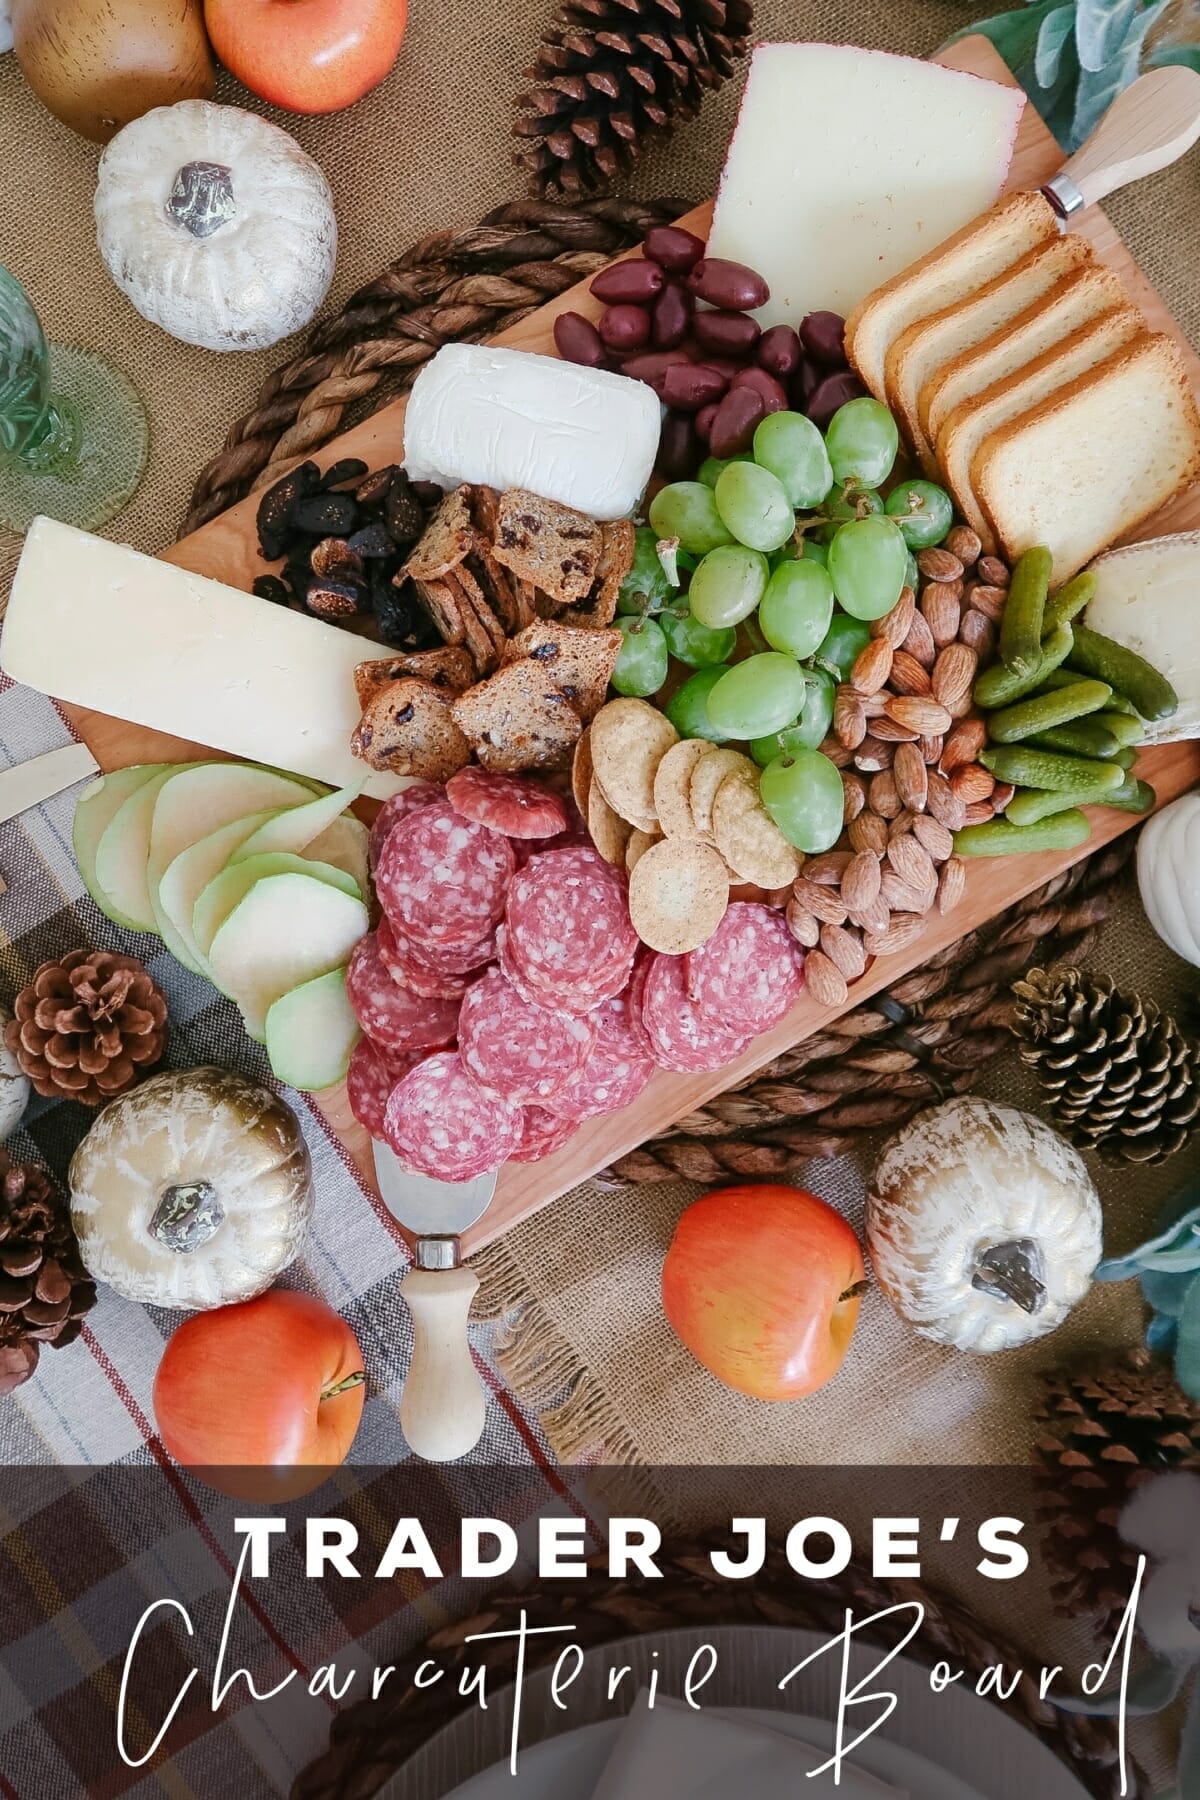 Create Your Own Trader Joe’s Charcuterie Board